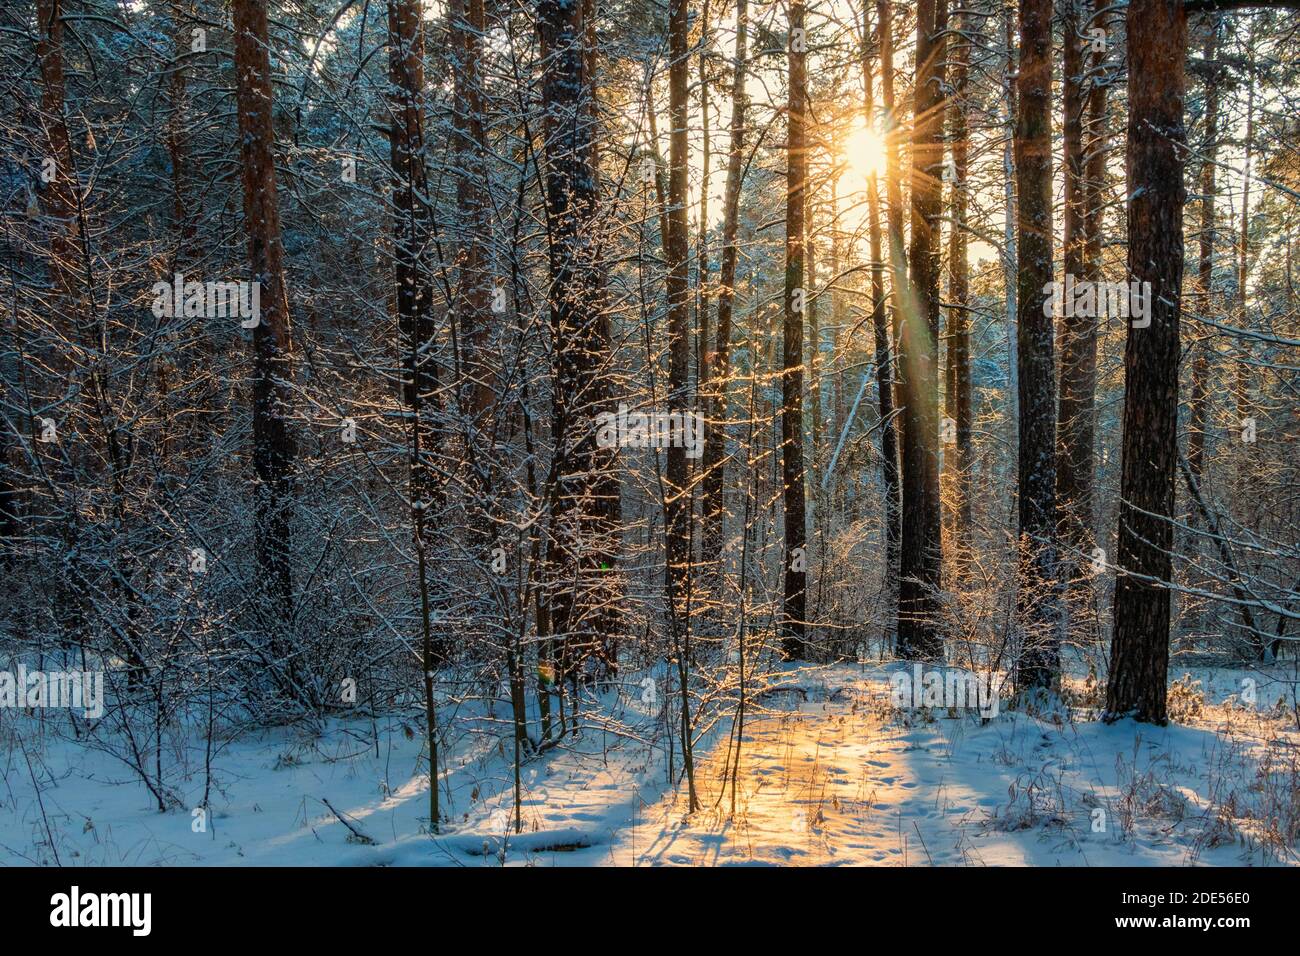 Winter landscape illuminated by a sunny clearing in a snow-covered forest. The photo was taken in the Chelyabinsk city forest. Stock Photo